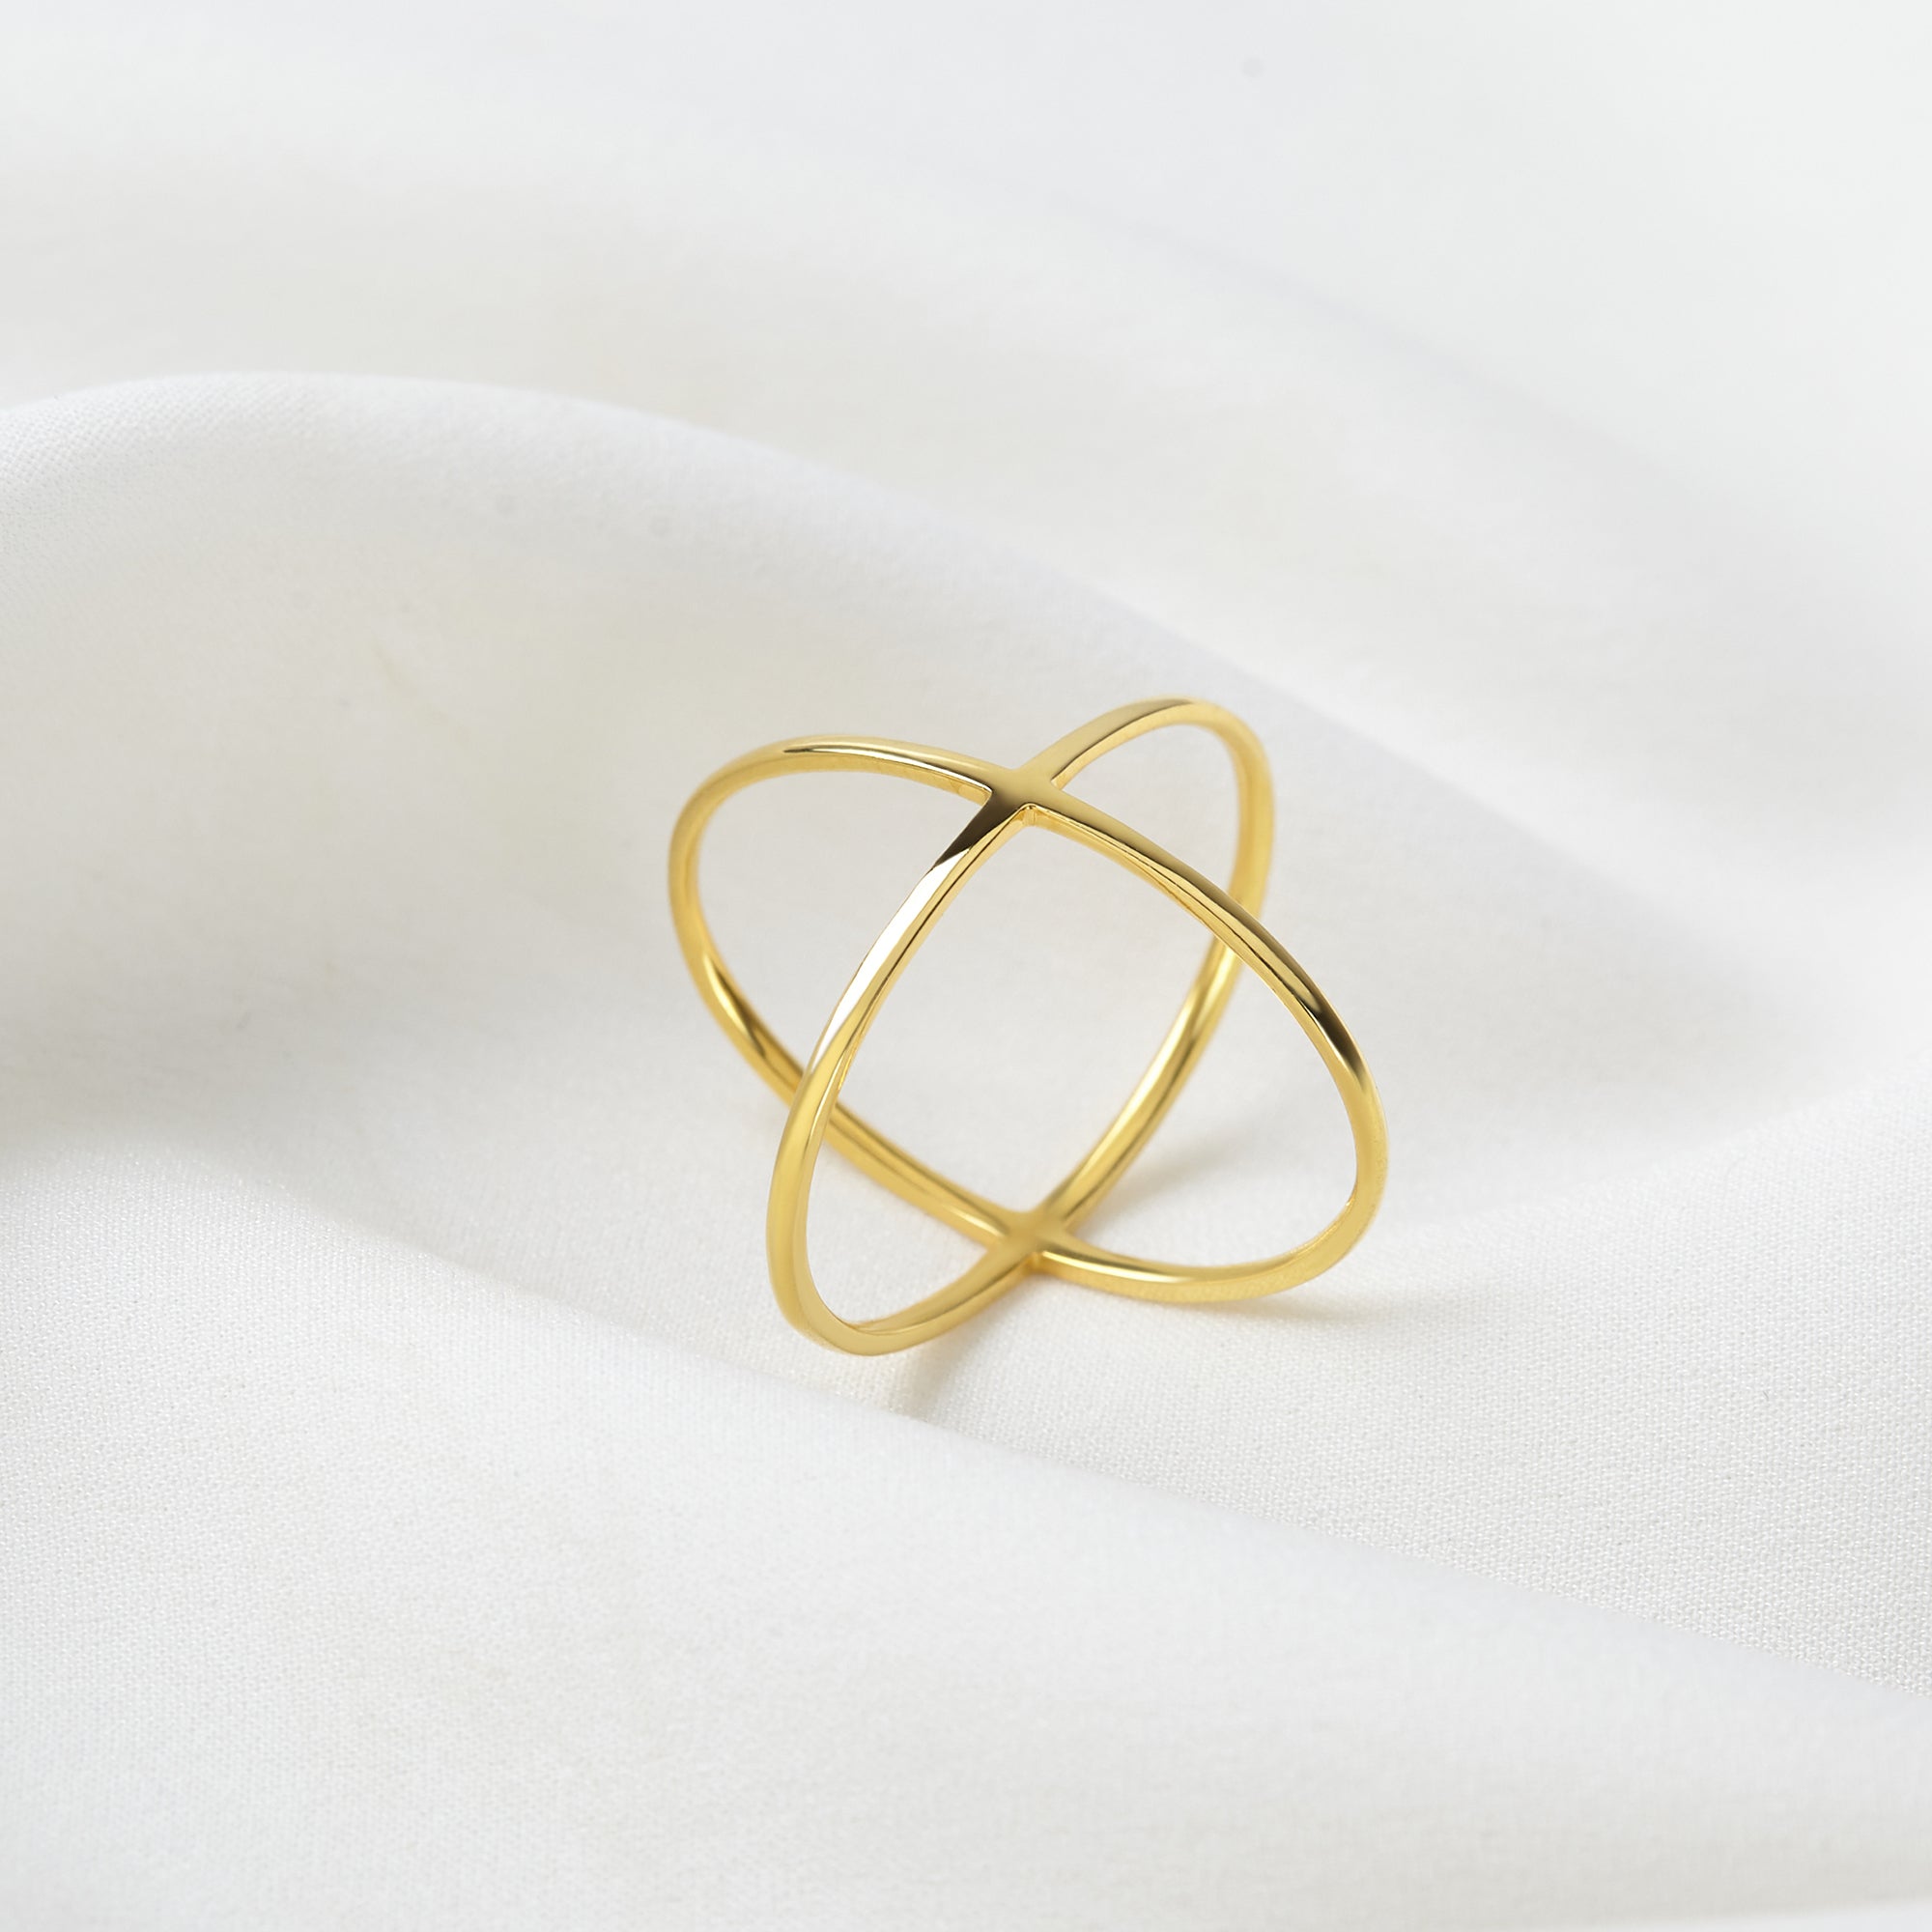 Hypoallergenic Gold Criss Cross Ring - Elegant and Versatile Statement Piece in Sterling Silver - Rings - Bijou Her -  -  - 